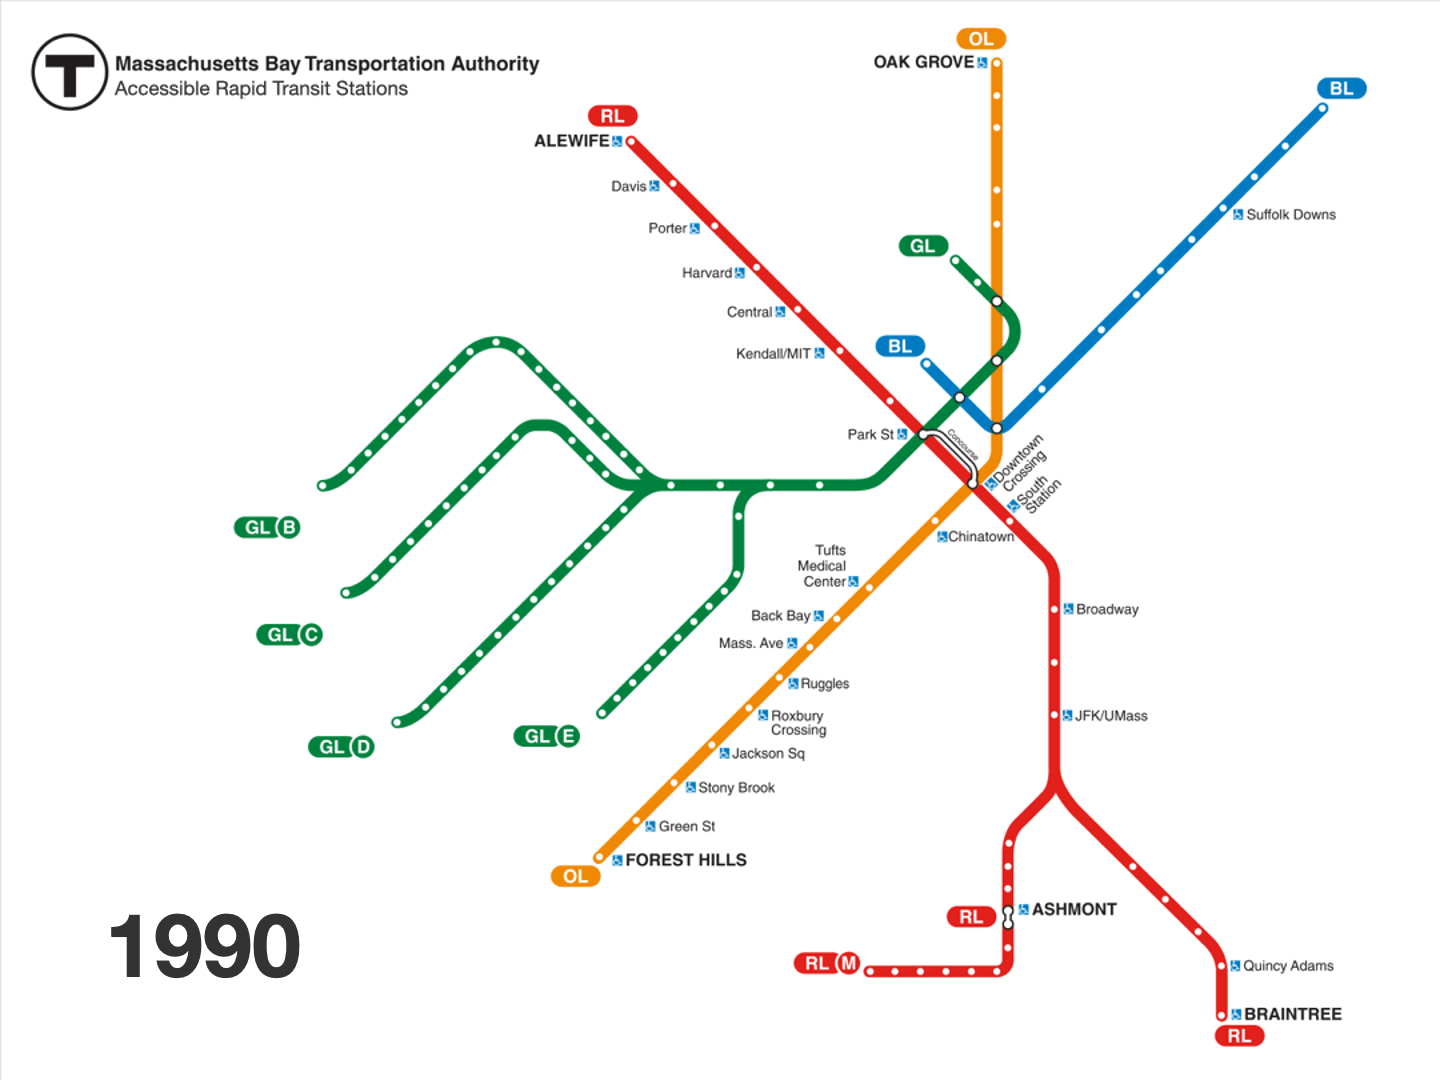 a gif showing MBTA system spider maps changing over the years